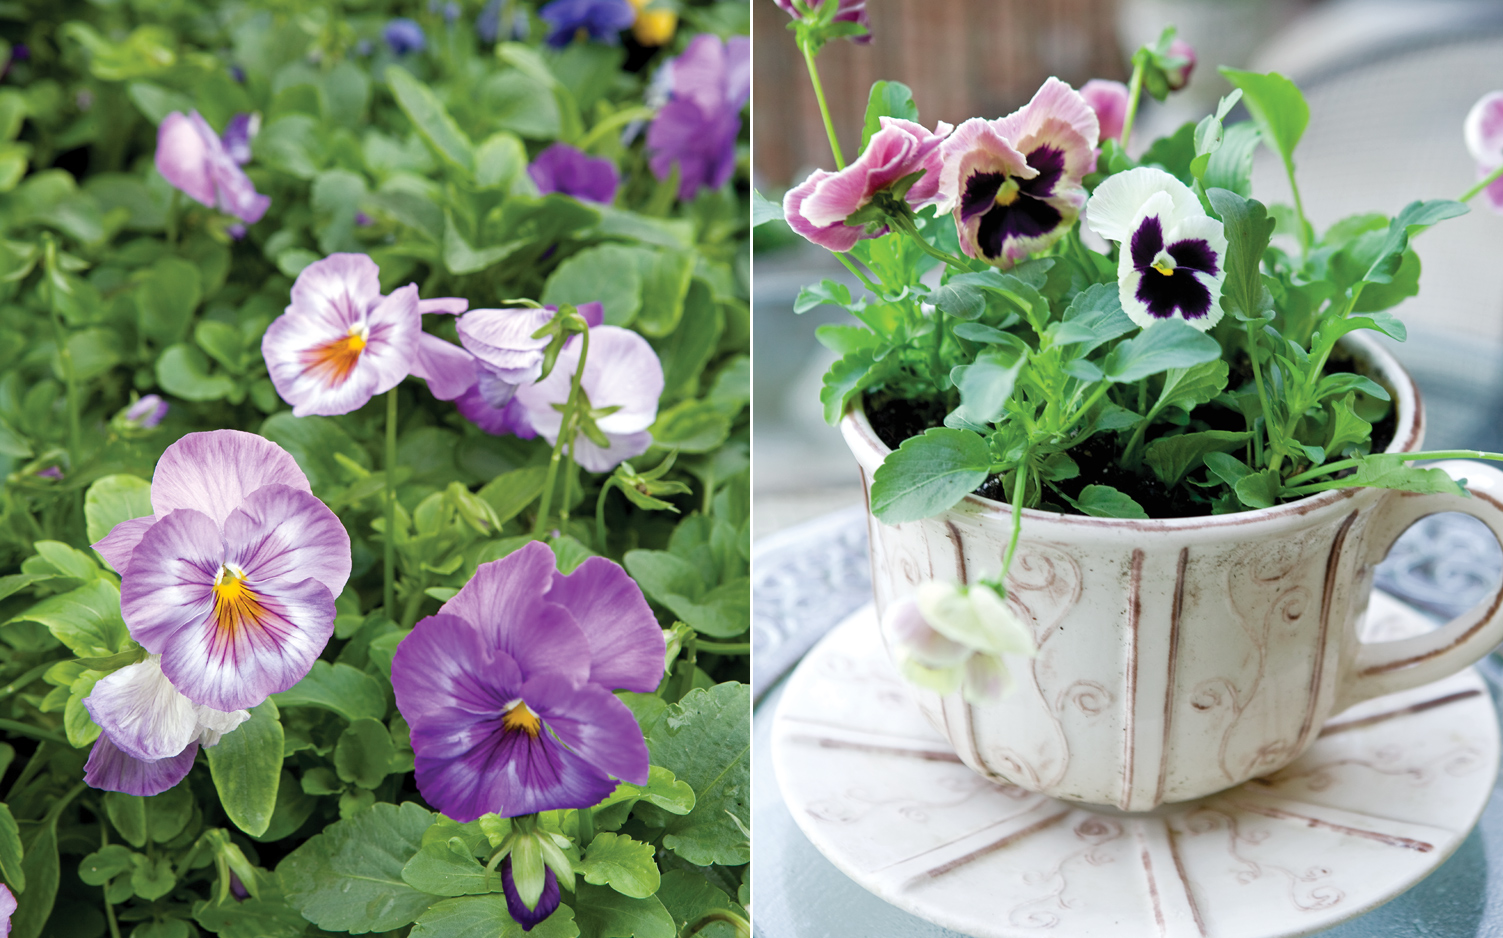 a picture of a teacup and pansies